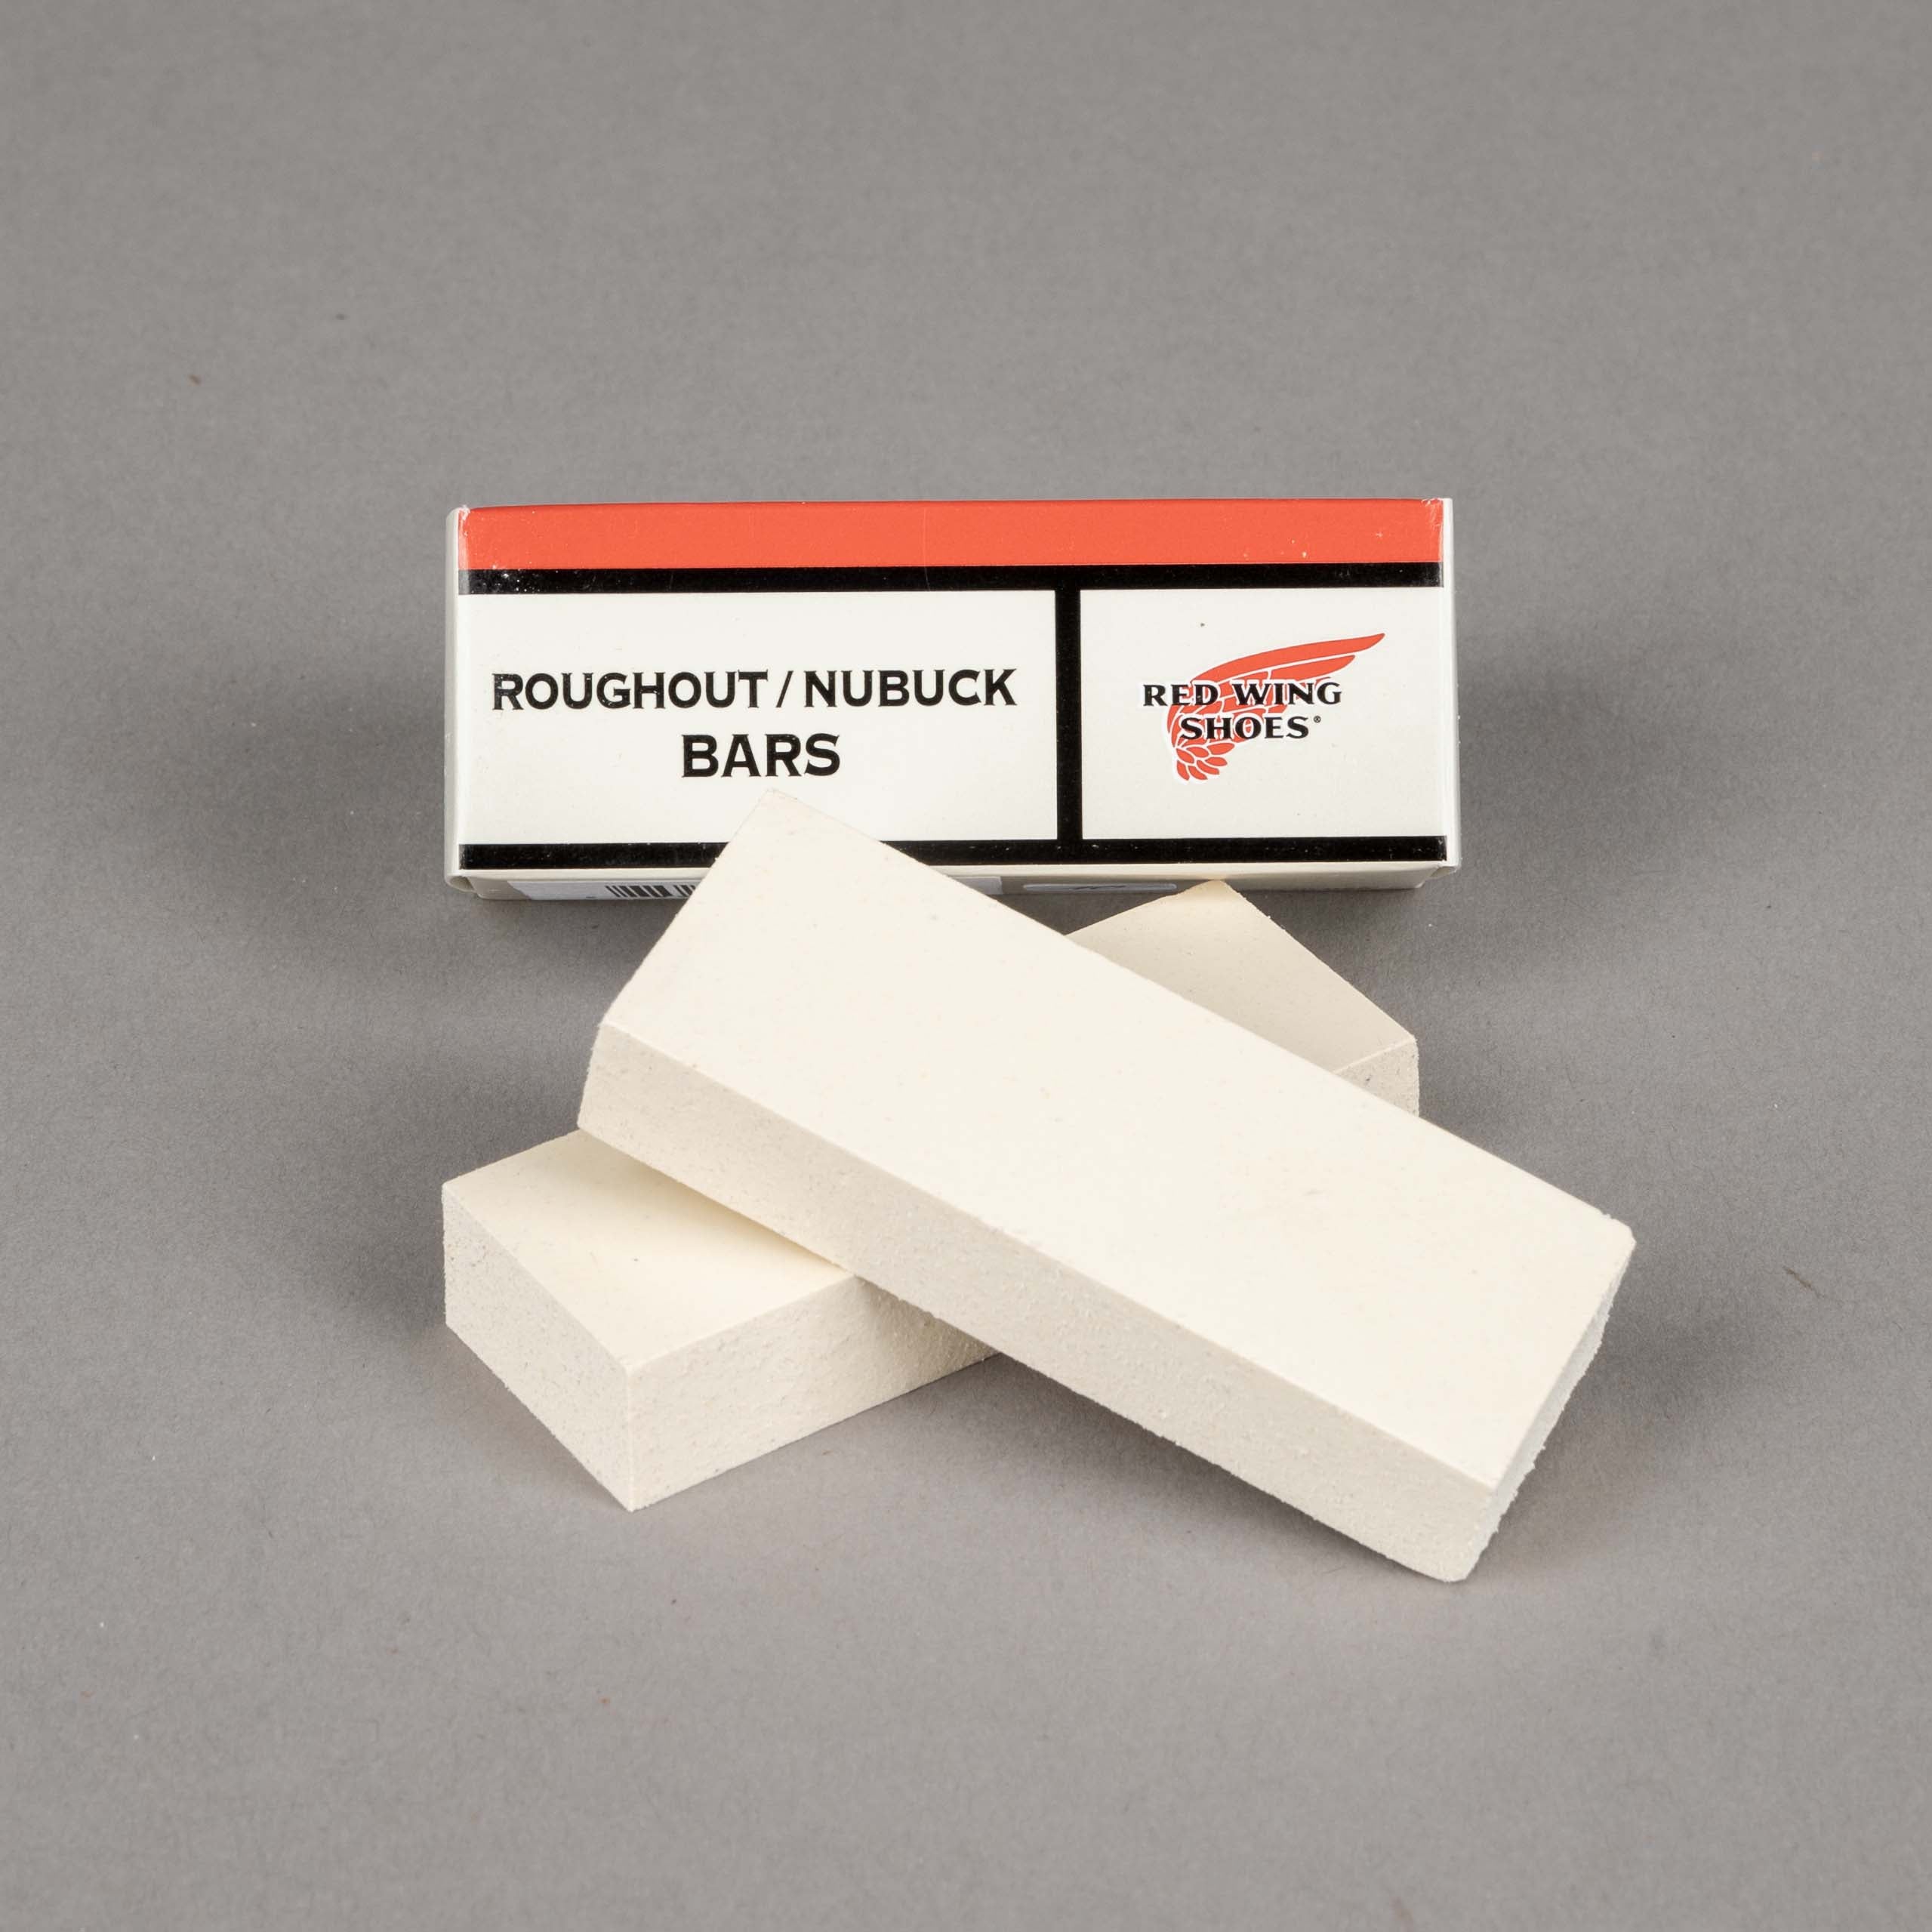 Roughout / Nubuck Cleaner Bars